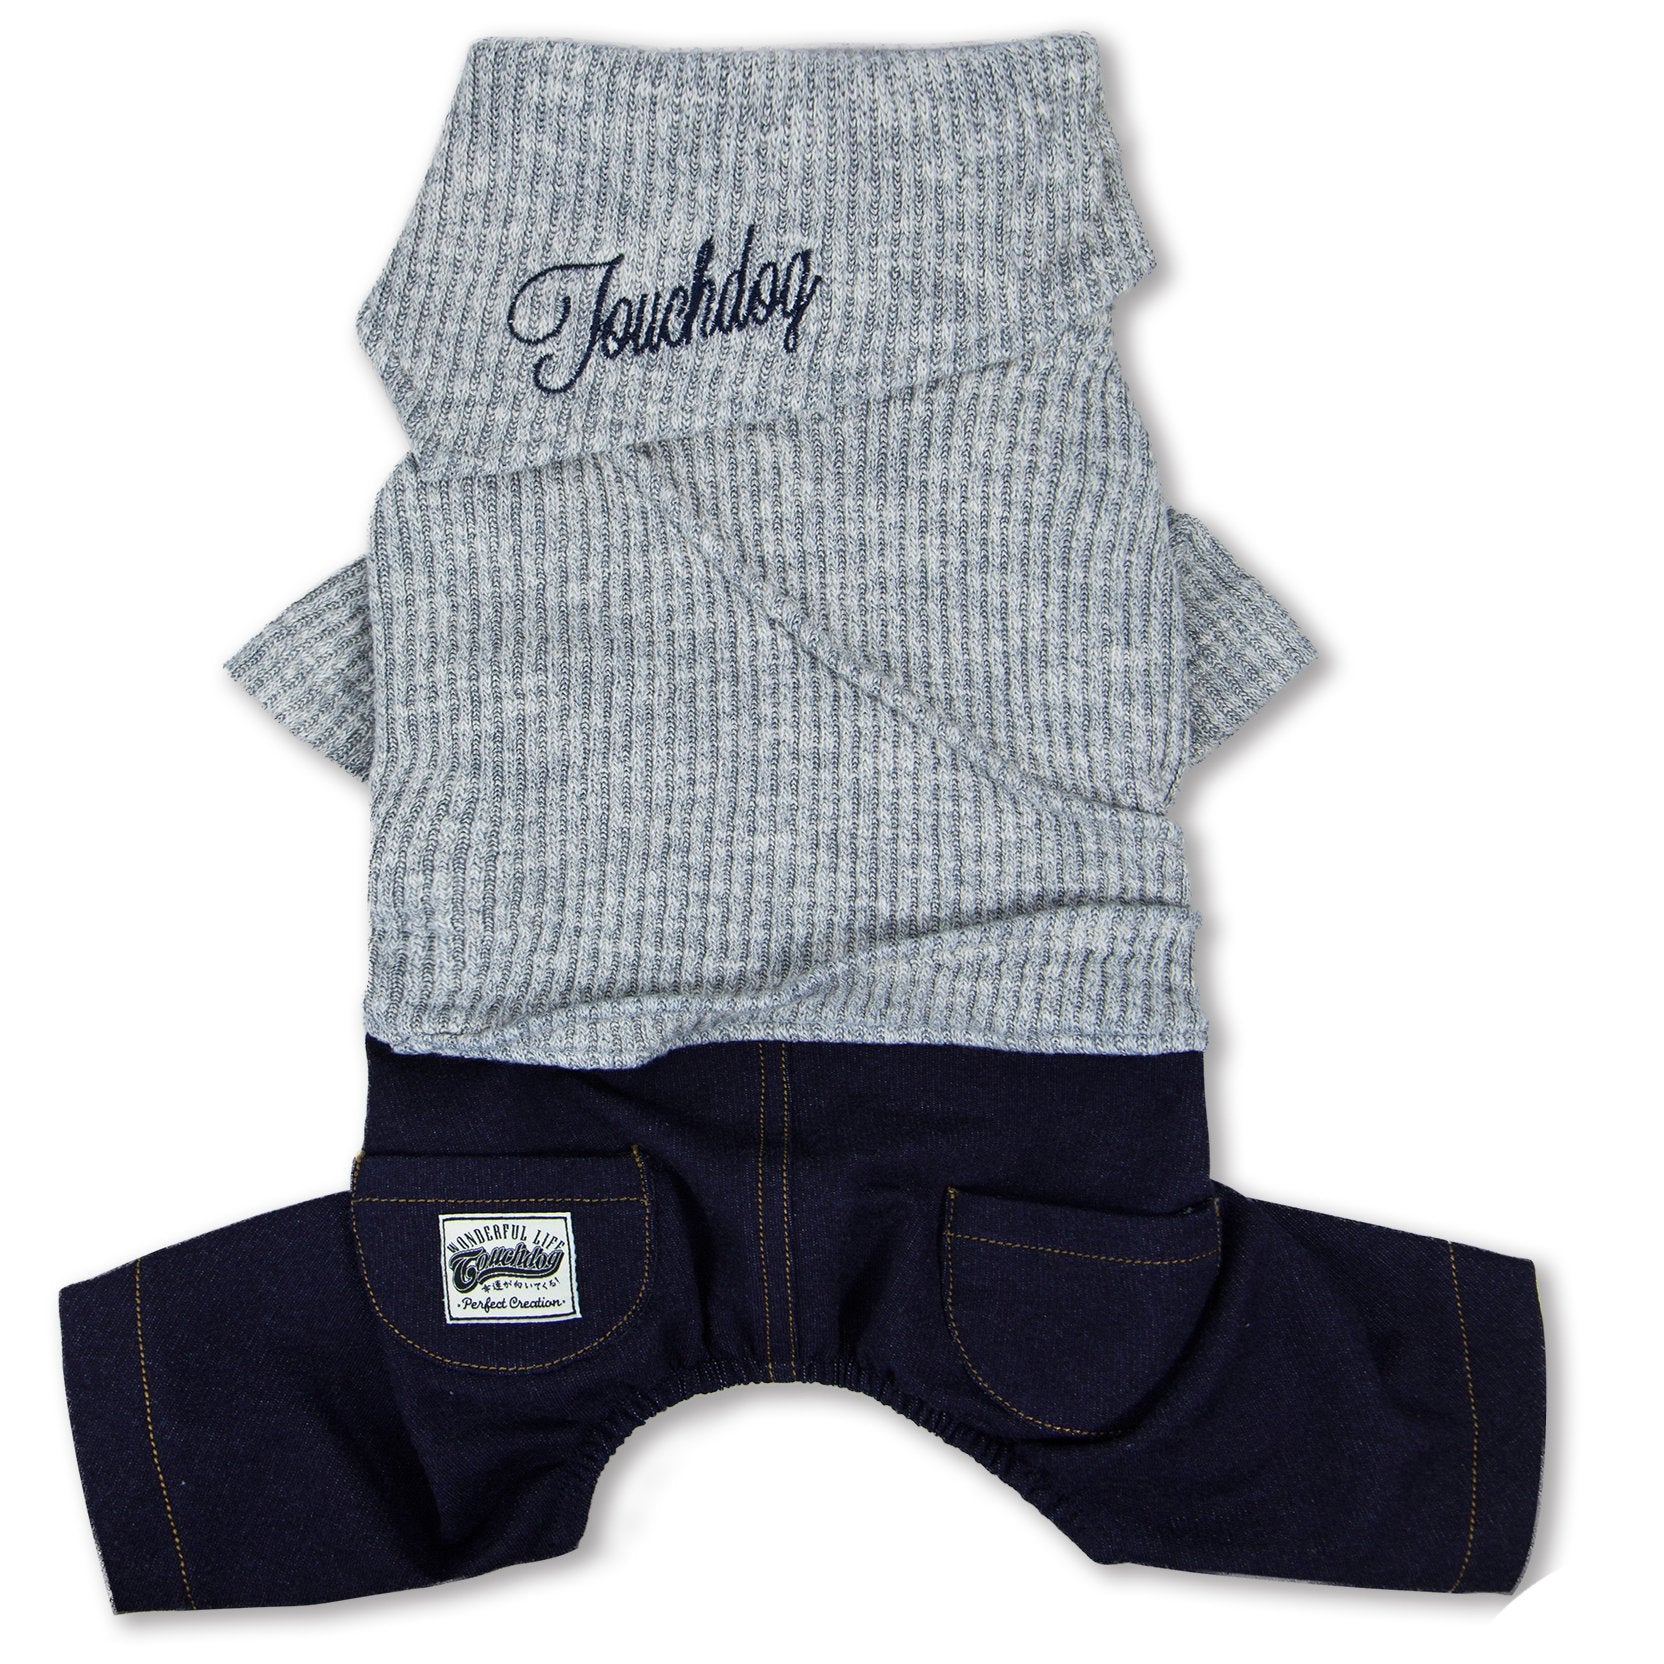 Touchdog Vogue Sweater & Denim Pant Outfit - X-Small - Grey